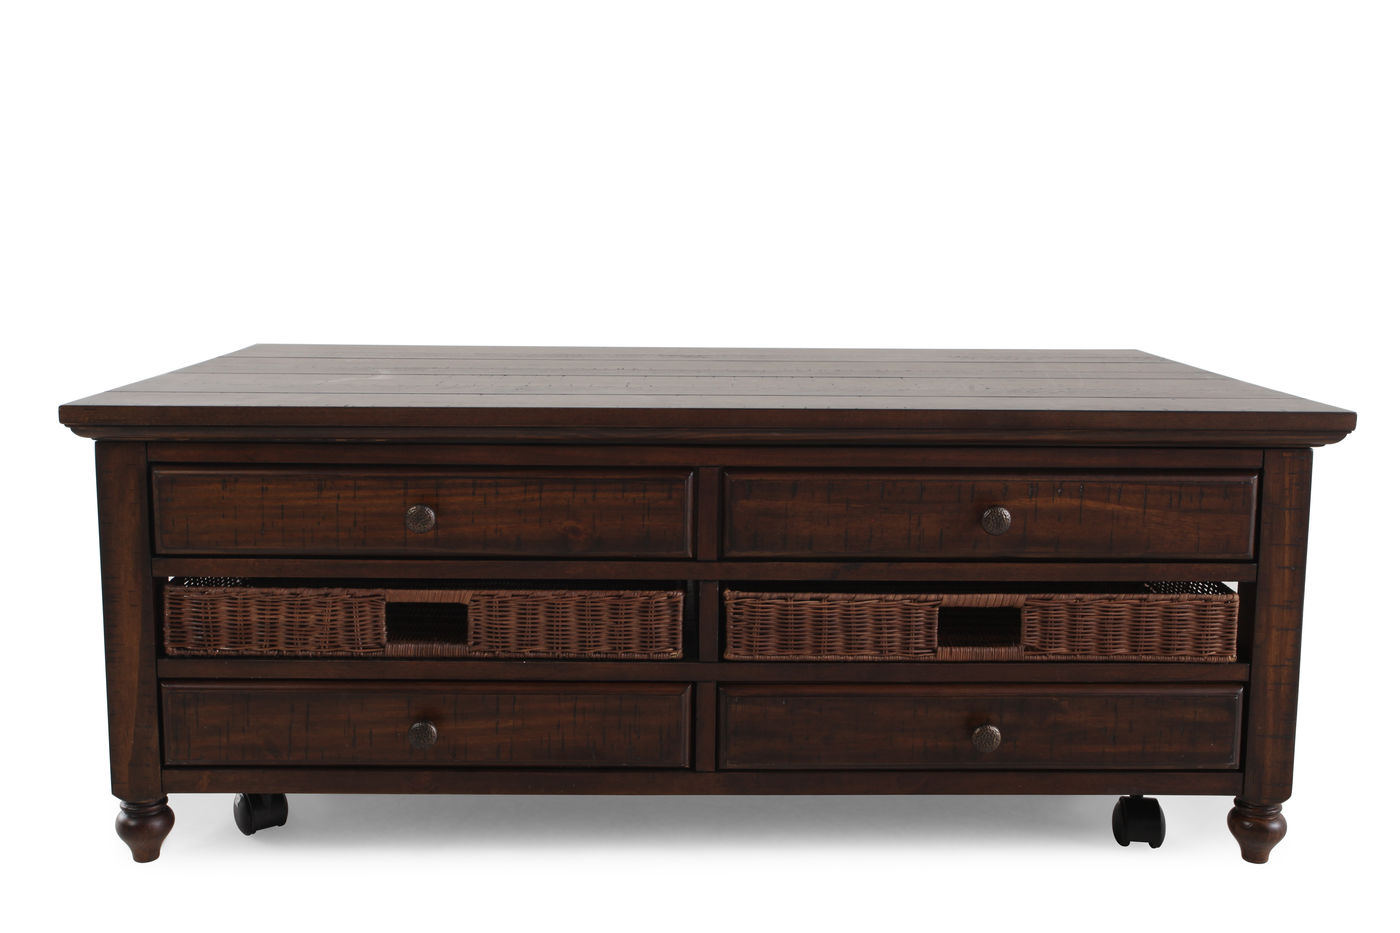 coffee tables cocktail mathis brothers mhfi martin furniture accent table rectangular lift top country tablenbspin dark walnut household decorative items best lamps brown and end